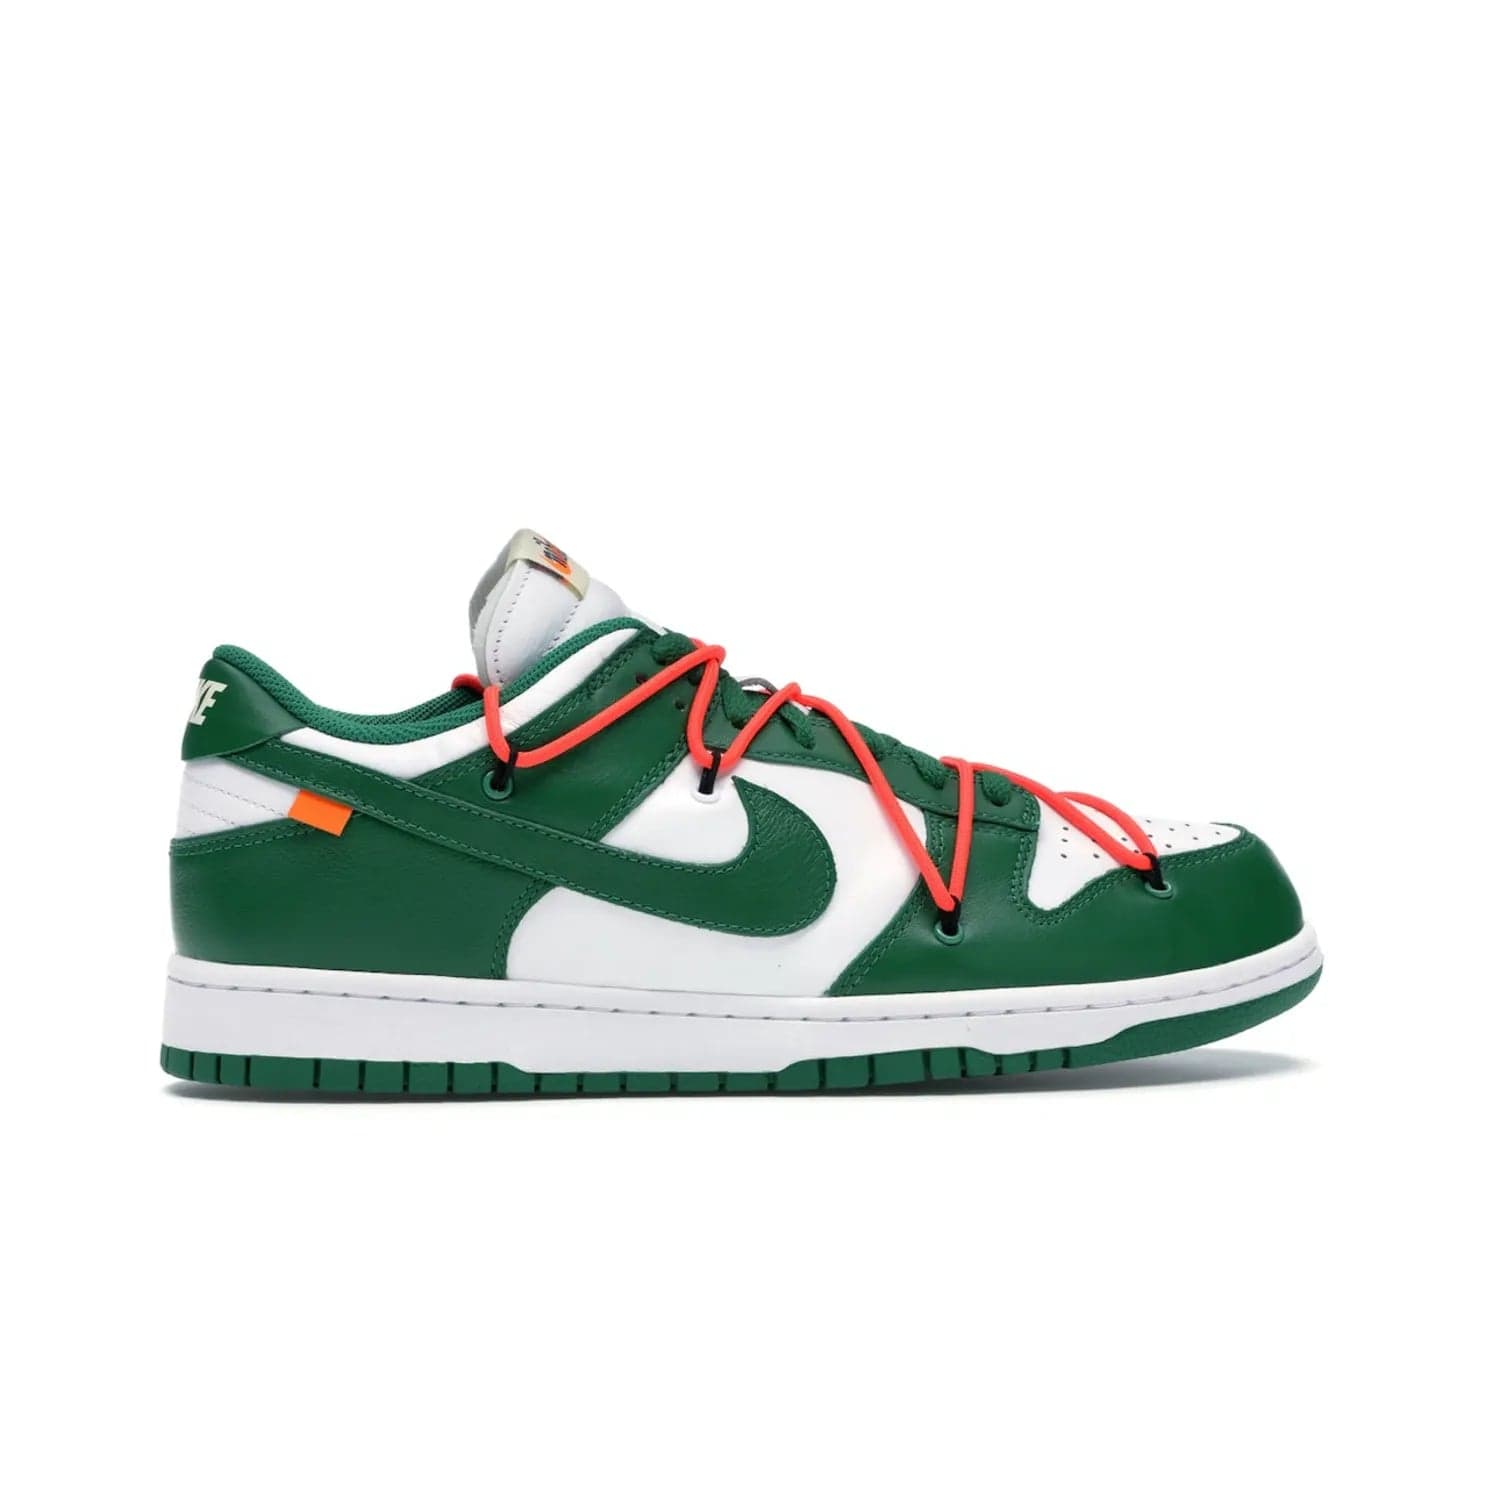 Nike Dunk Low Off-White Pine Green - Image 36 - Only at www.BallersClubKickz.com - The Nike Dunk Low Off-White Pine Green combines classic 1980s style with modern-day design. Featuring white leather uppers and pine green overlays, these classic kicks feature secondary lacing system, zip-ties and signature Off-White text. Releasing in December 2019, these shoes are a timeless classic for any wardrobe.